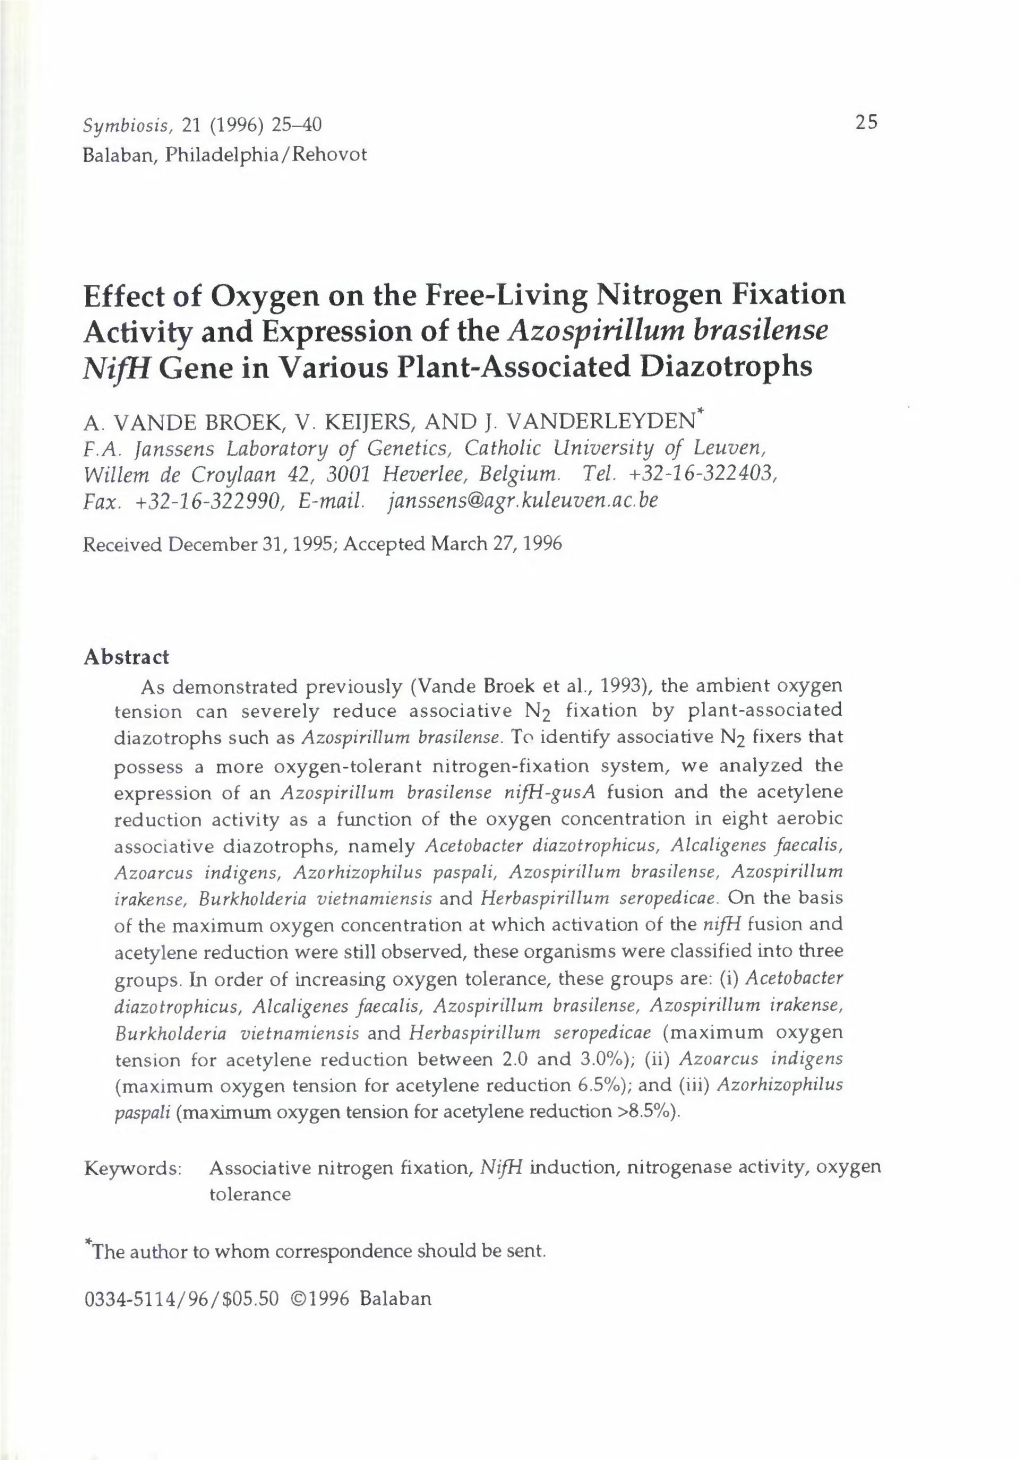 Effect of Oxygen on the Free-Living Nitrogen Fixation Activity and Expression of the Azospirillum Brasilense Nifh Gene in Various Plant-Associated Diazotrophs